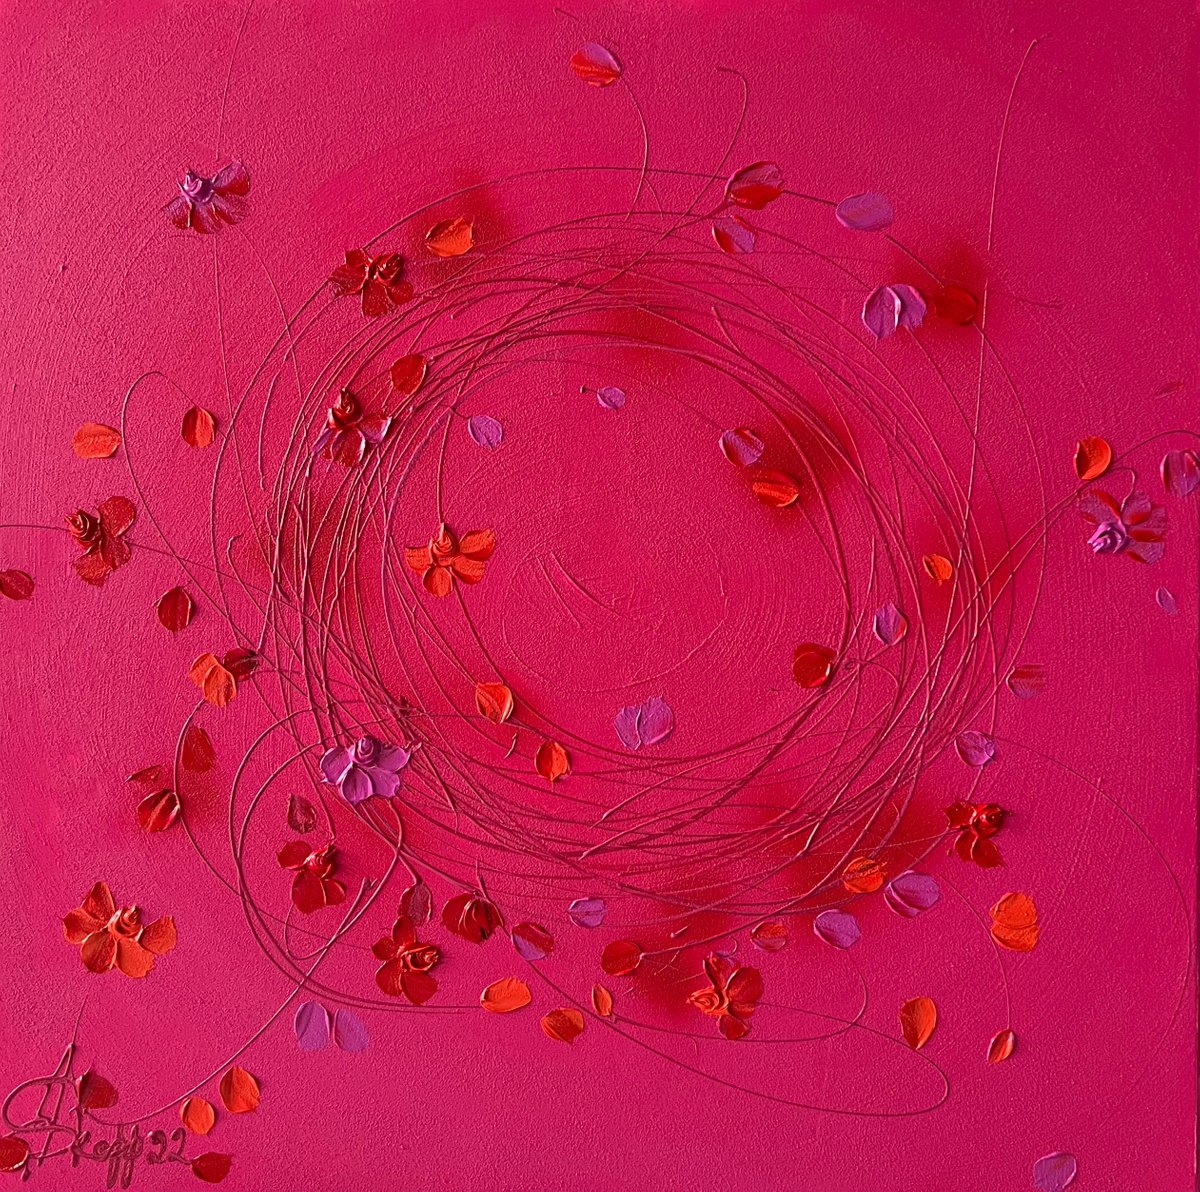 Square acrylic painting with flowers -Elysian Visions-? by Anastassia Skopp